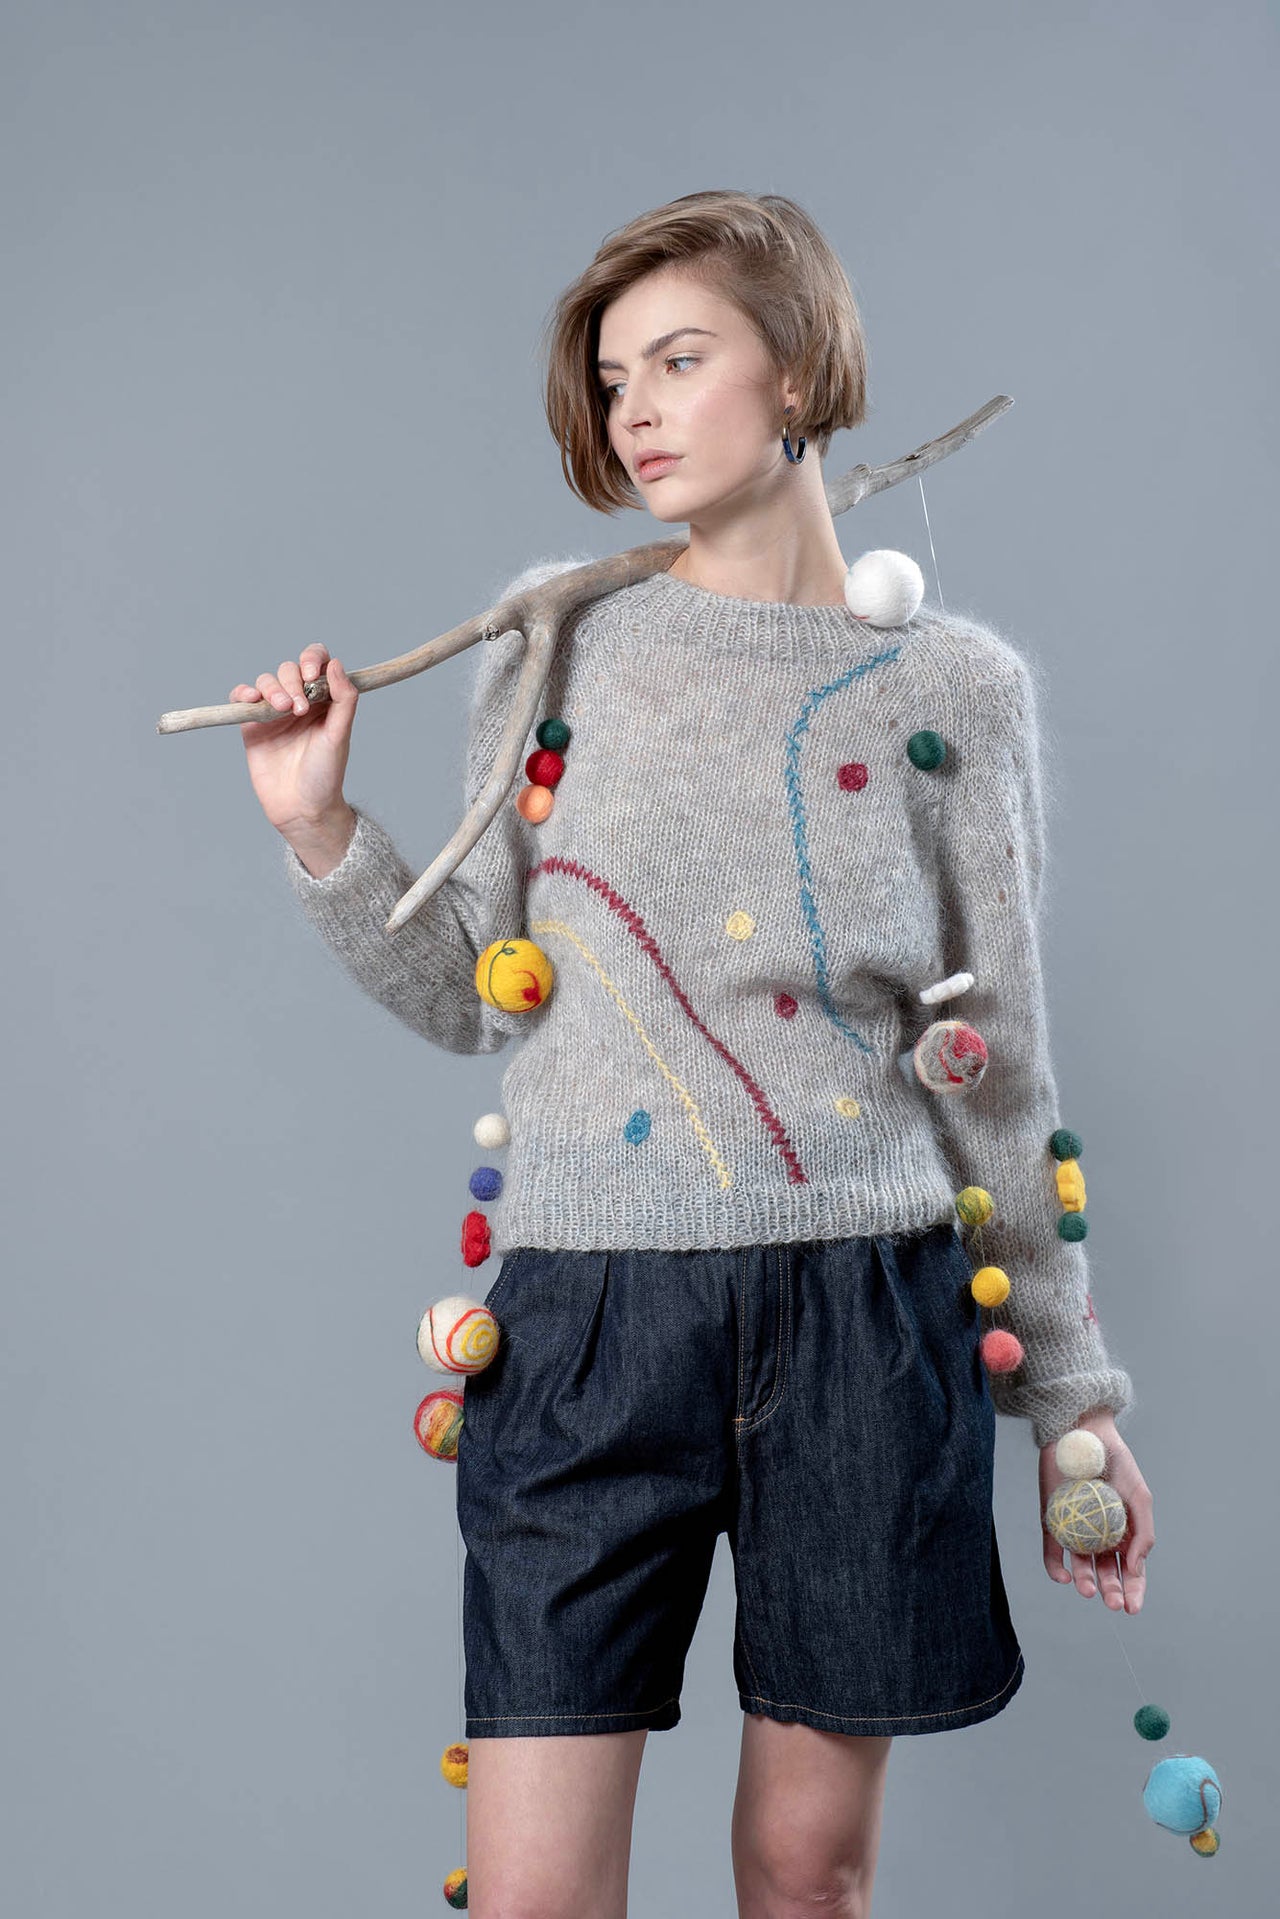 Woman wearing grey mohair sweater and holding over her shoulder a wooden stick from which wool balls are hanging. The sweater has 3 colourful embroidered line running along it and a few embroidered dots. 